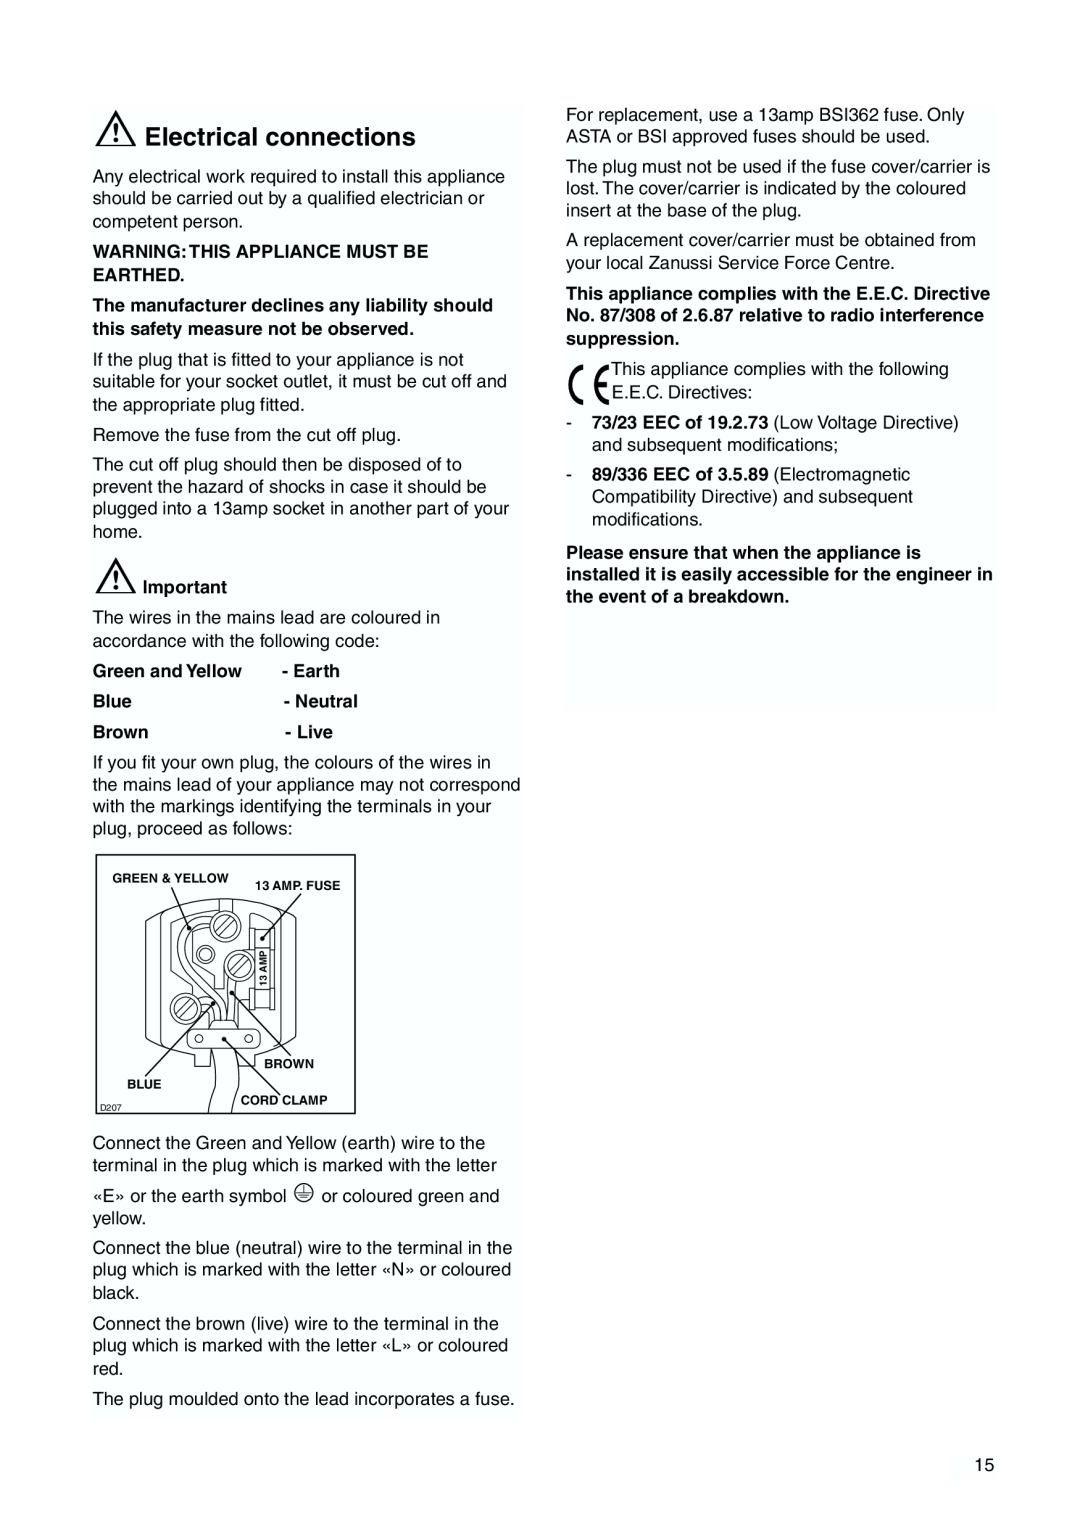 Zanussi ZBB 7294 manual Electrical connections, Warning This Appliance Must Be Earthed, Green and Yellow 